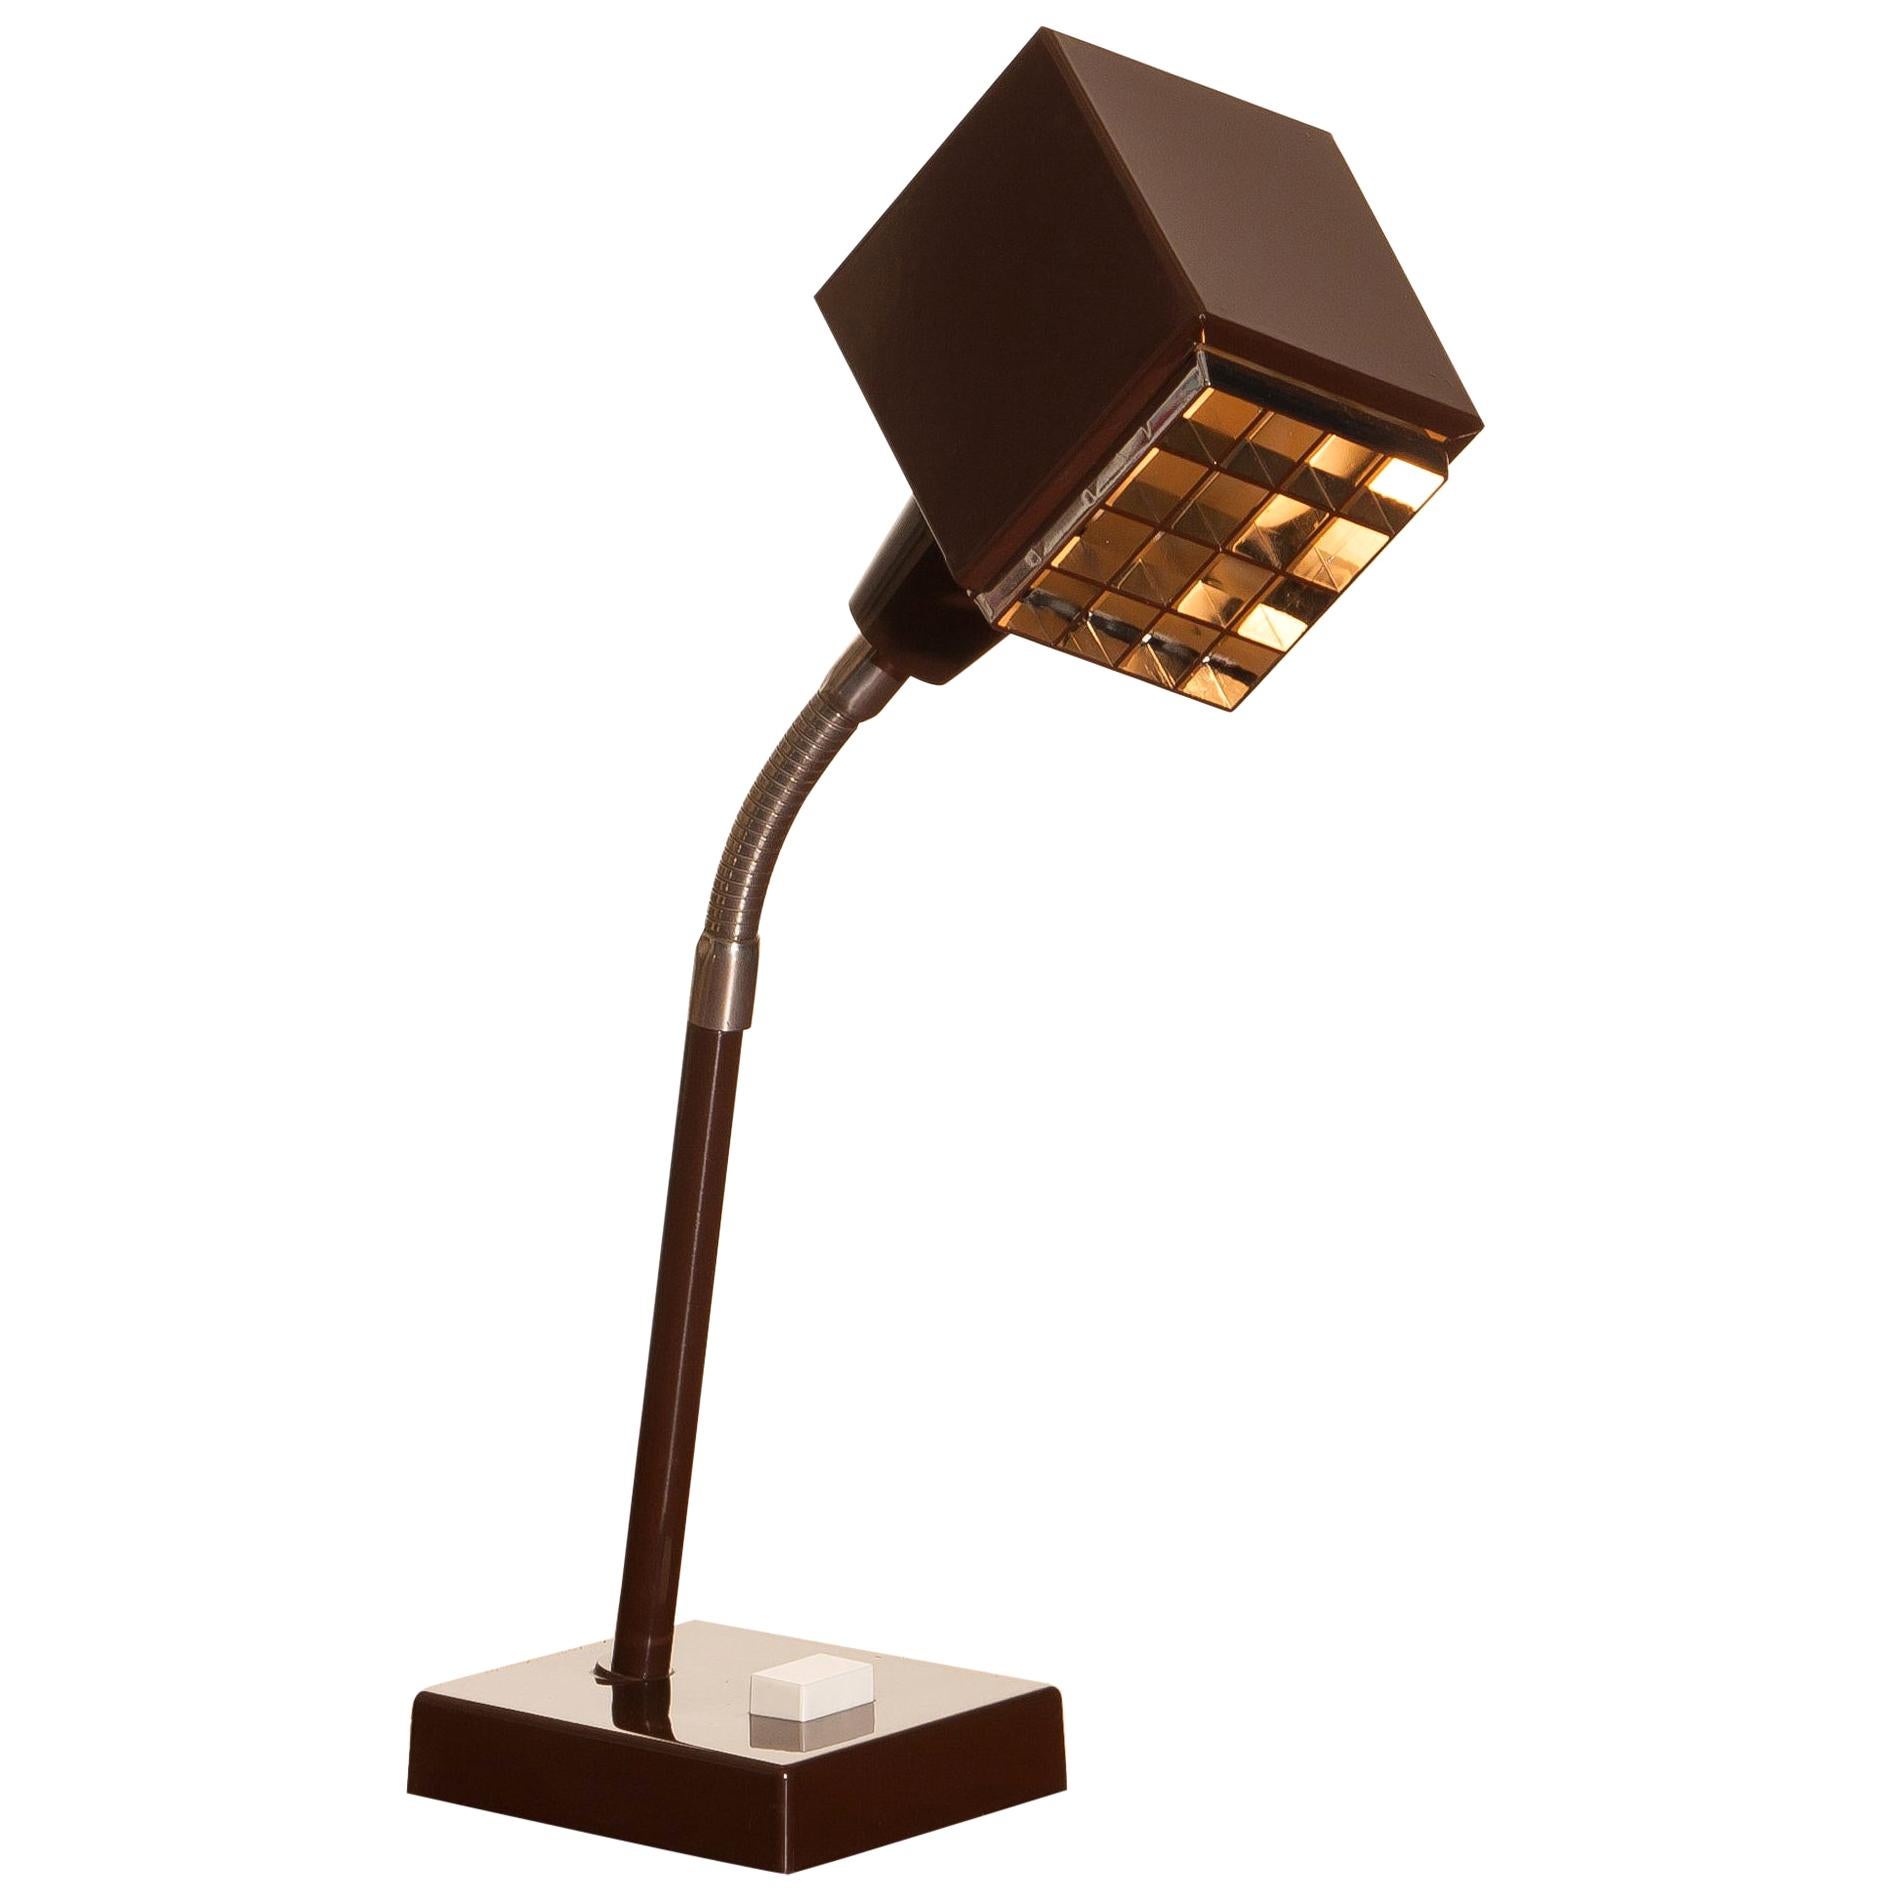 1970s, Dark Brown Metal, Desk Lamp "the Cube" by Hans-Anne Jakobsson for Elidus